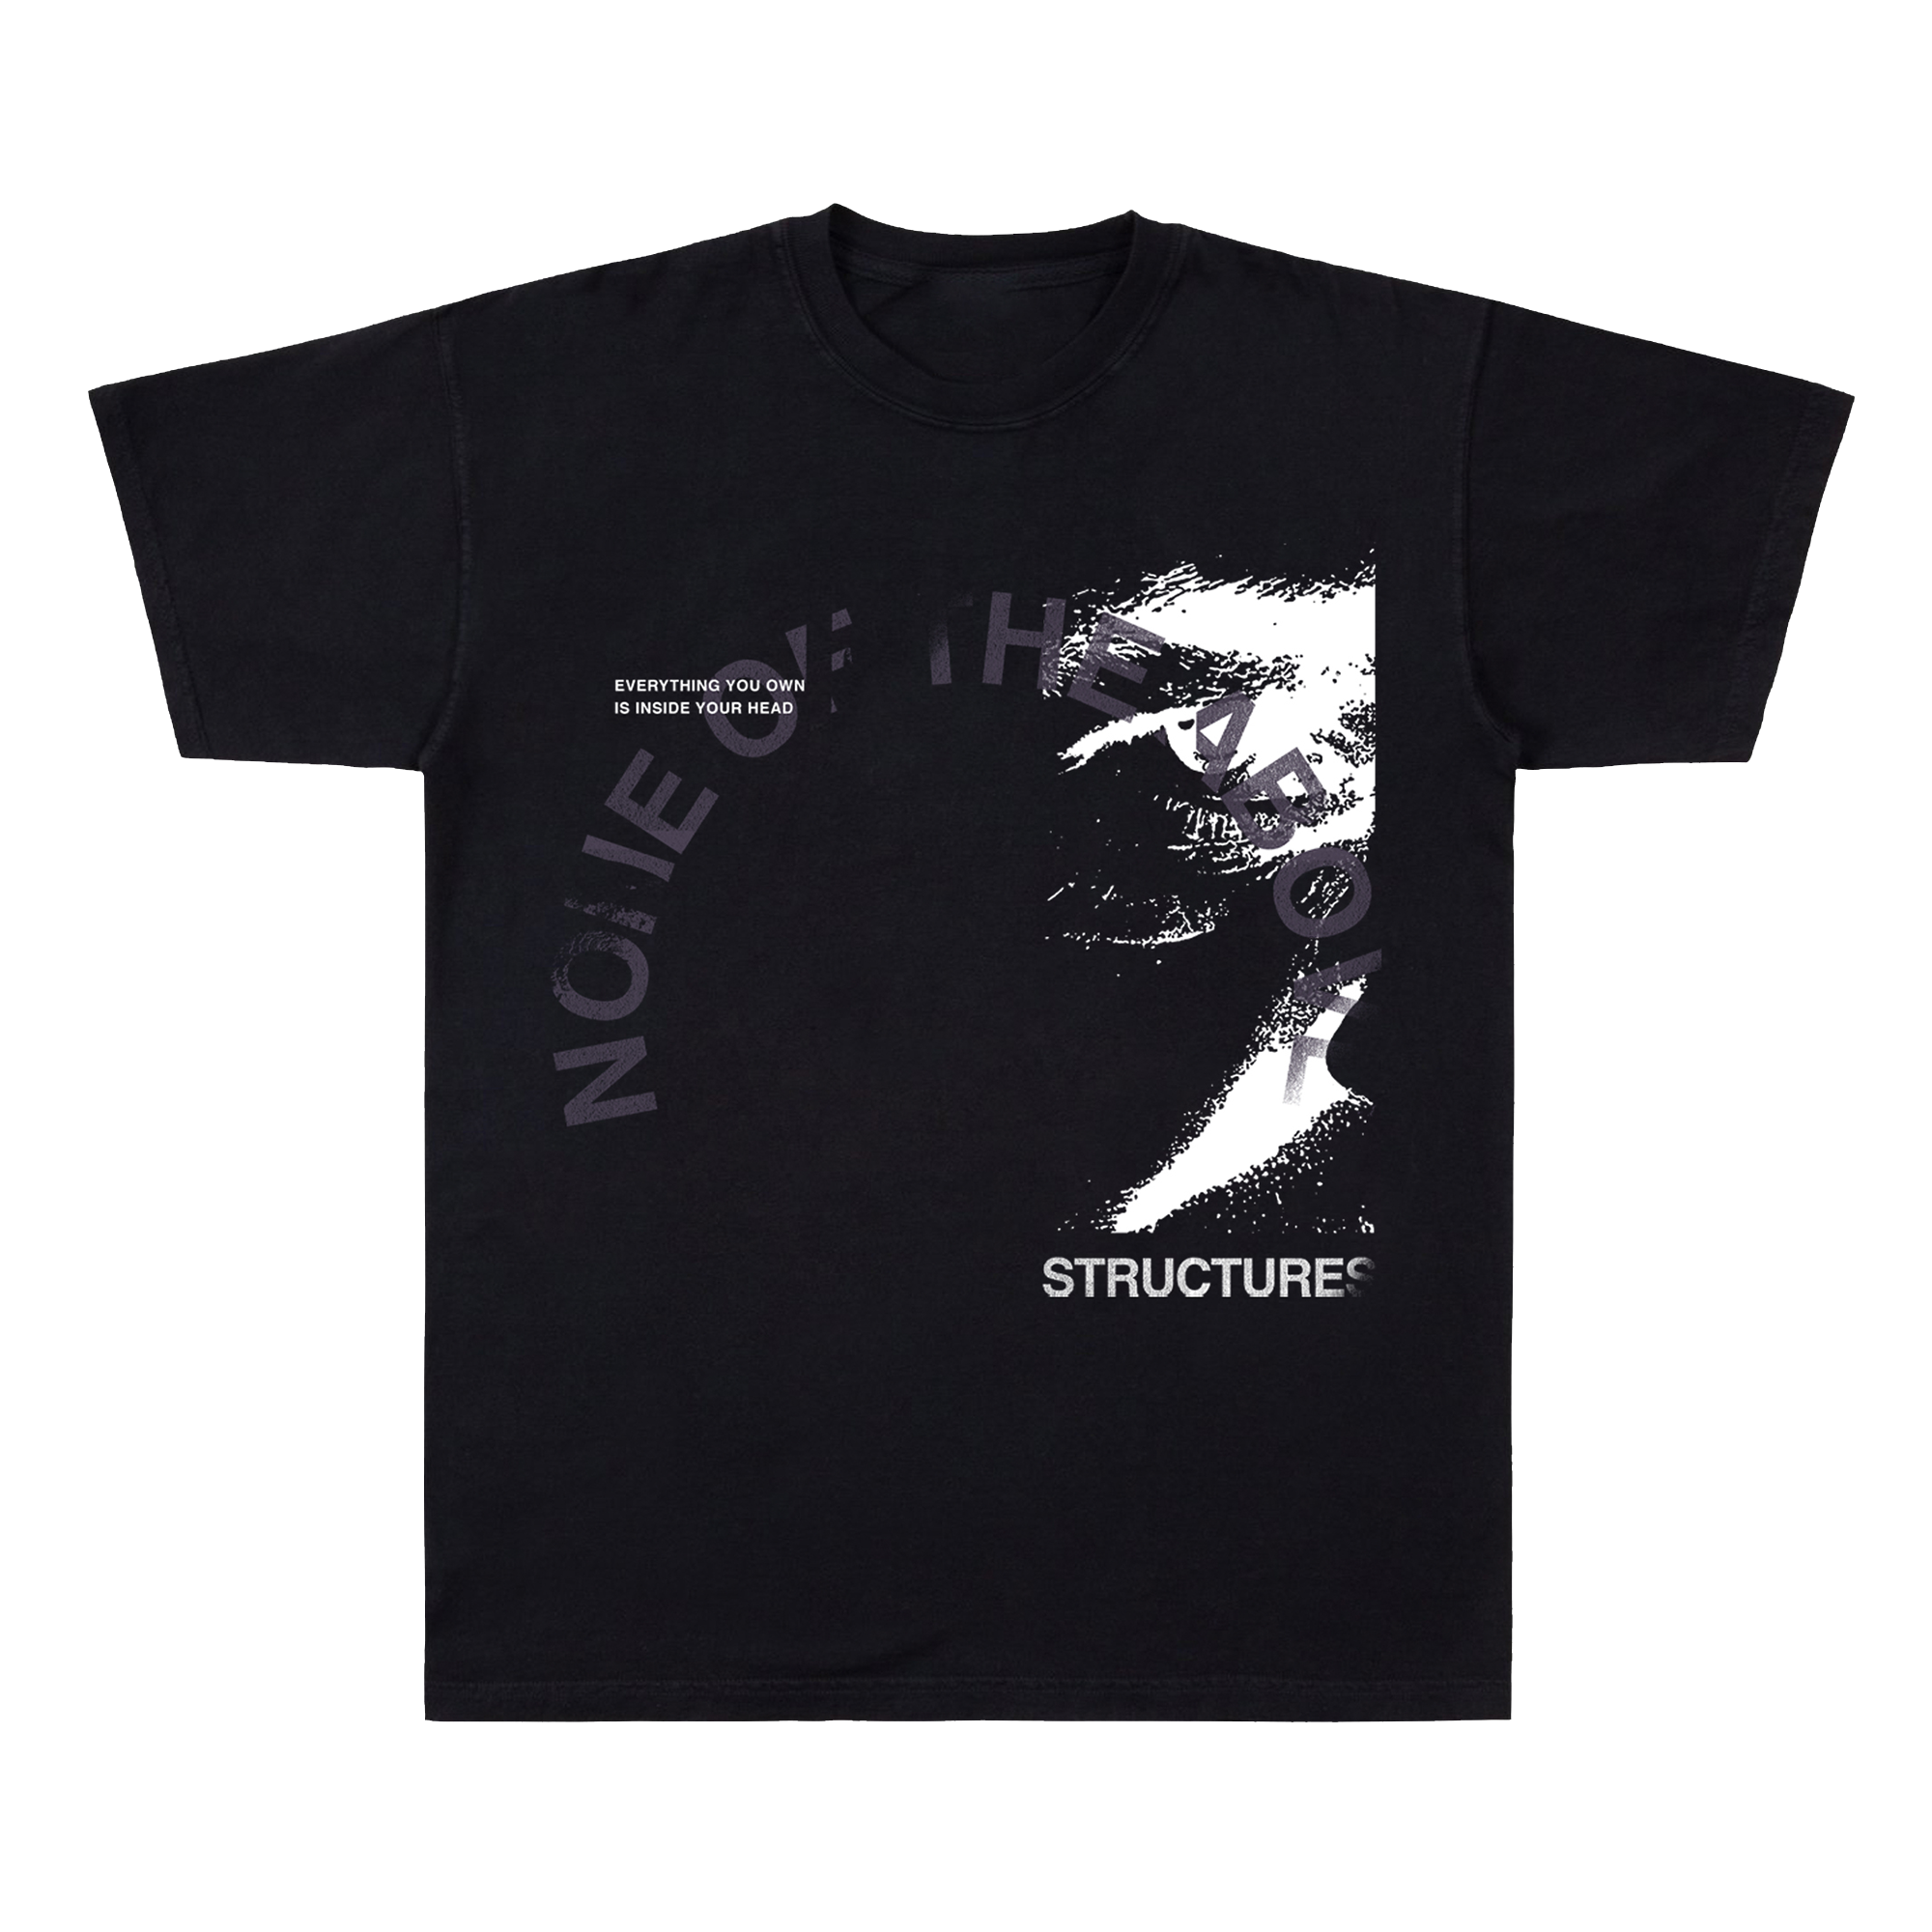 Structures - None Of The Above Black Shirt